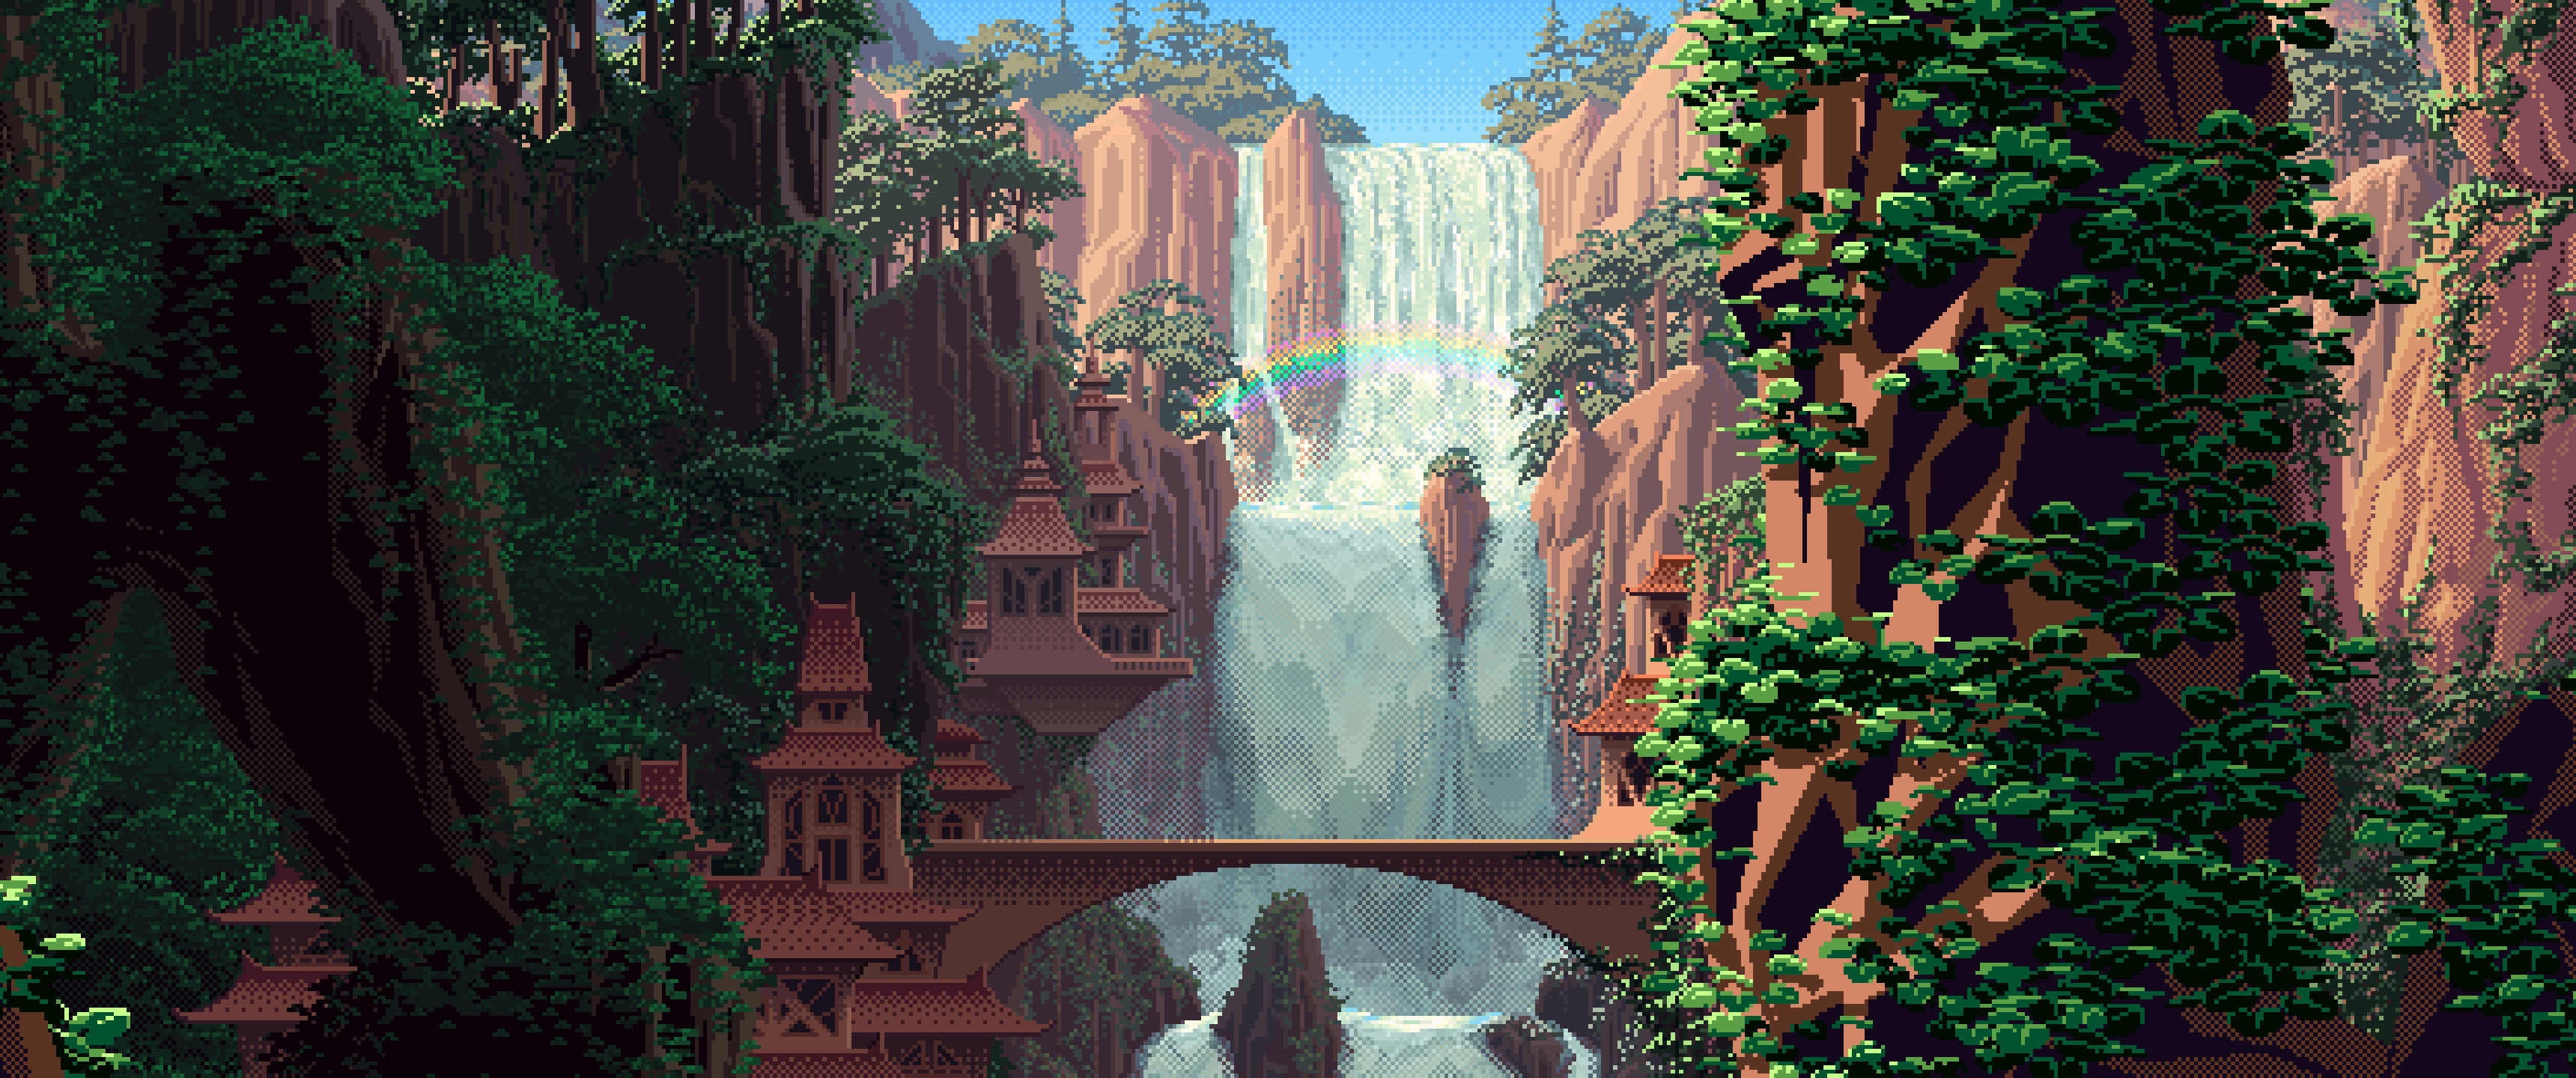 My collection of custom cropped pixelart wallpaper [3440x1440]